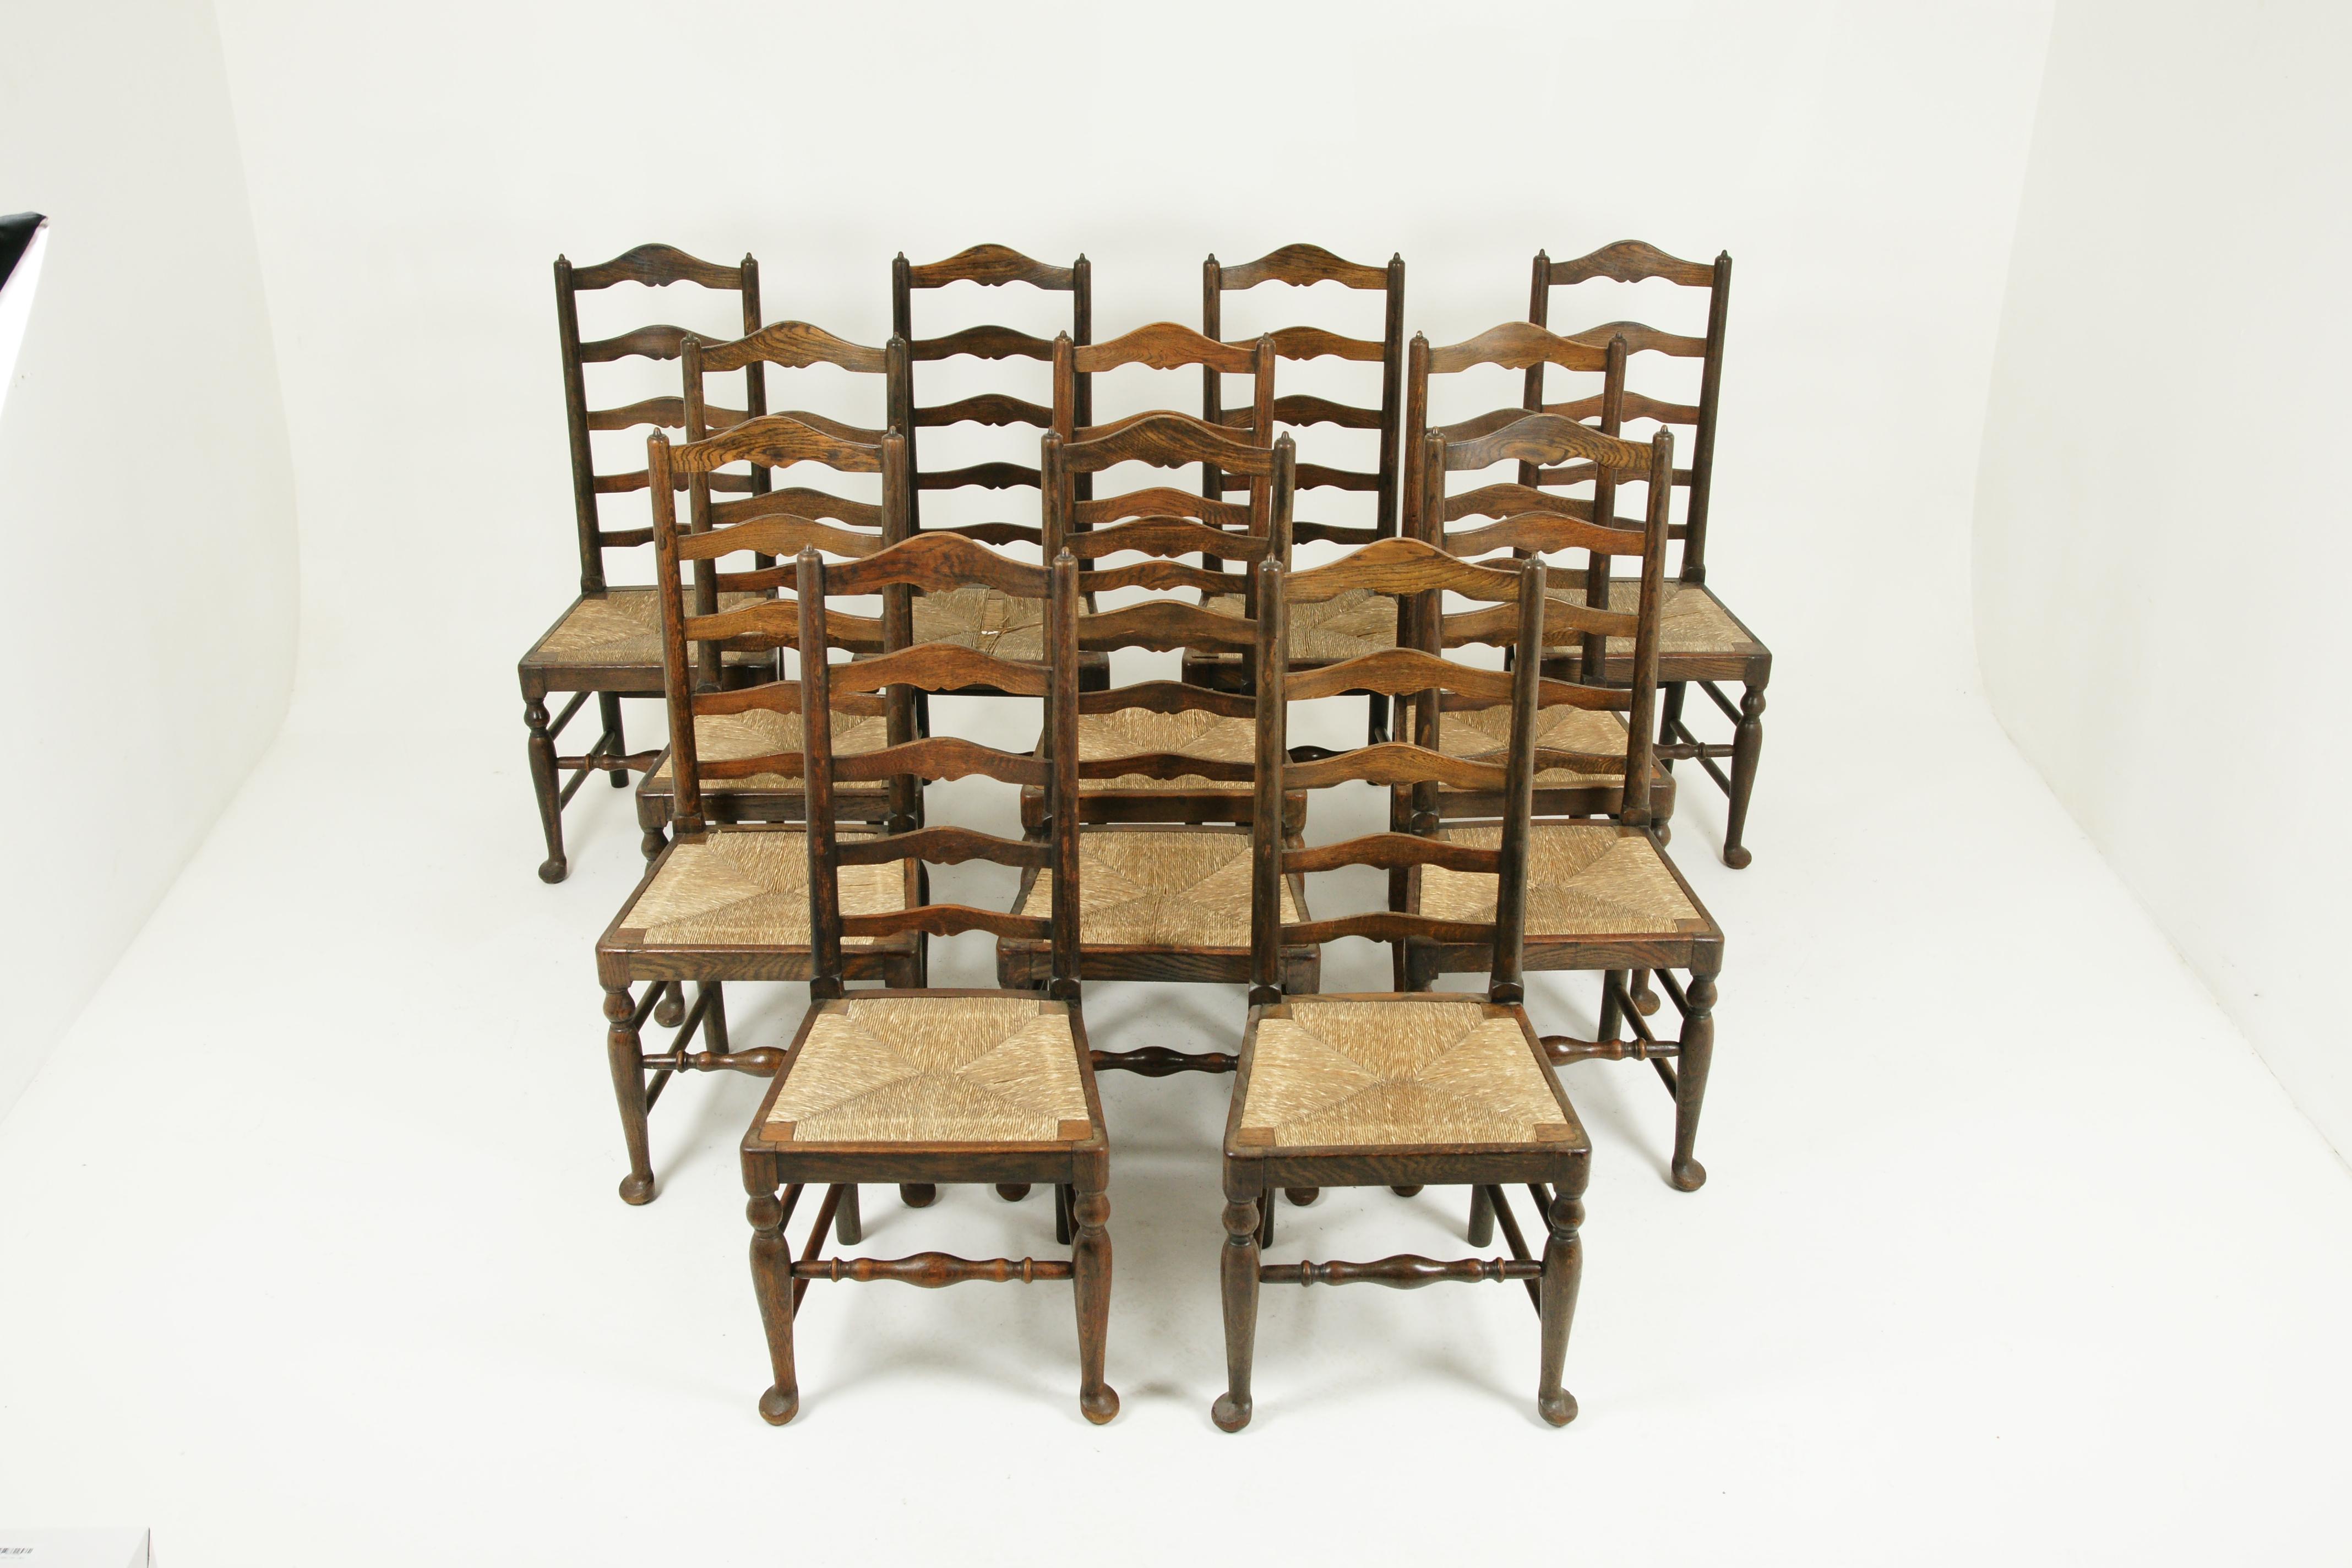 Hand-Crafted Rush Seat Chairs, Set of 14 Chairs, 12+2 Chairs, 14 Dining Chairs, 1920